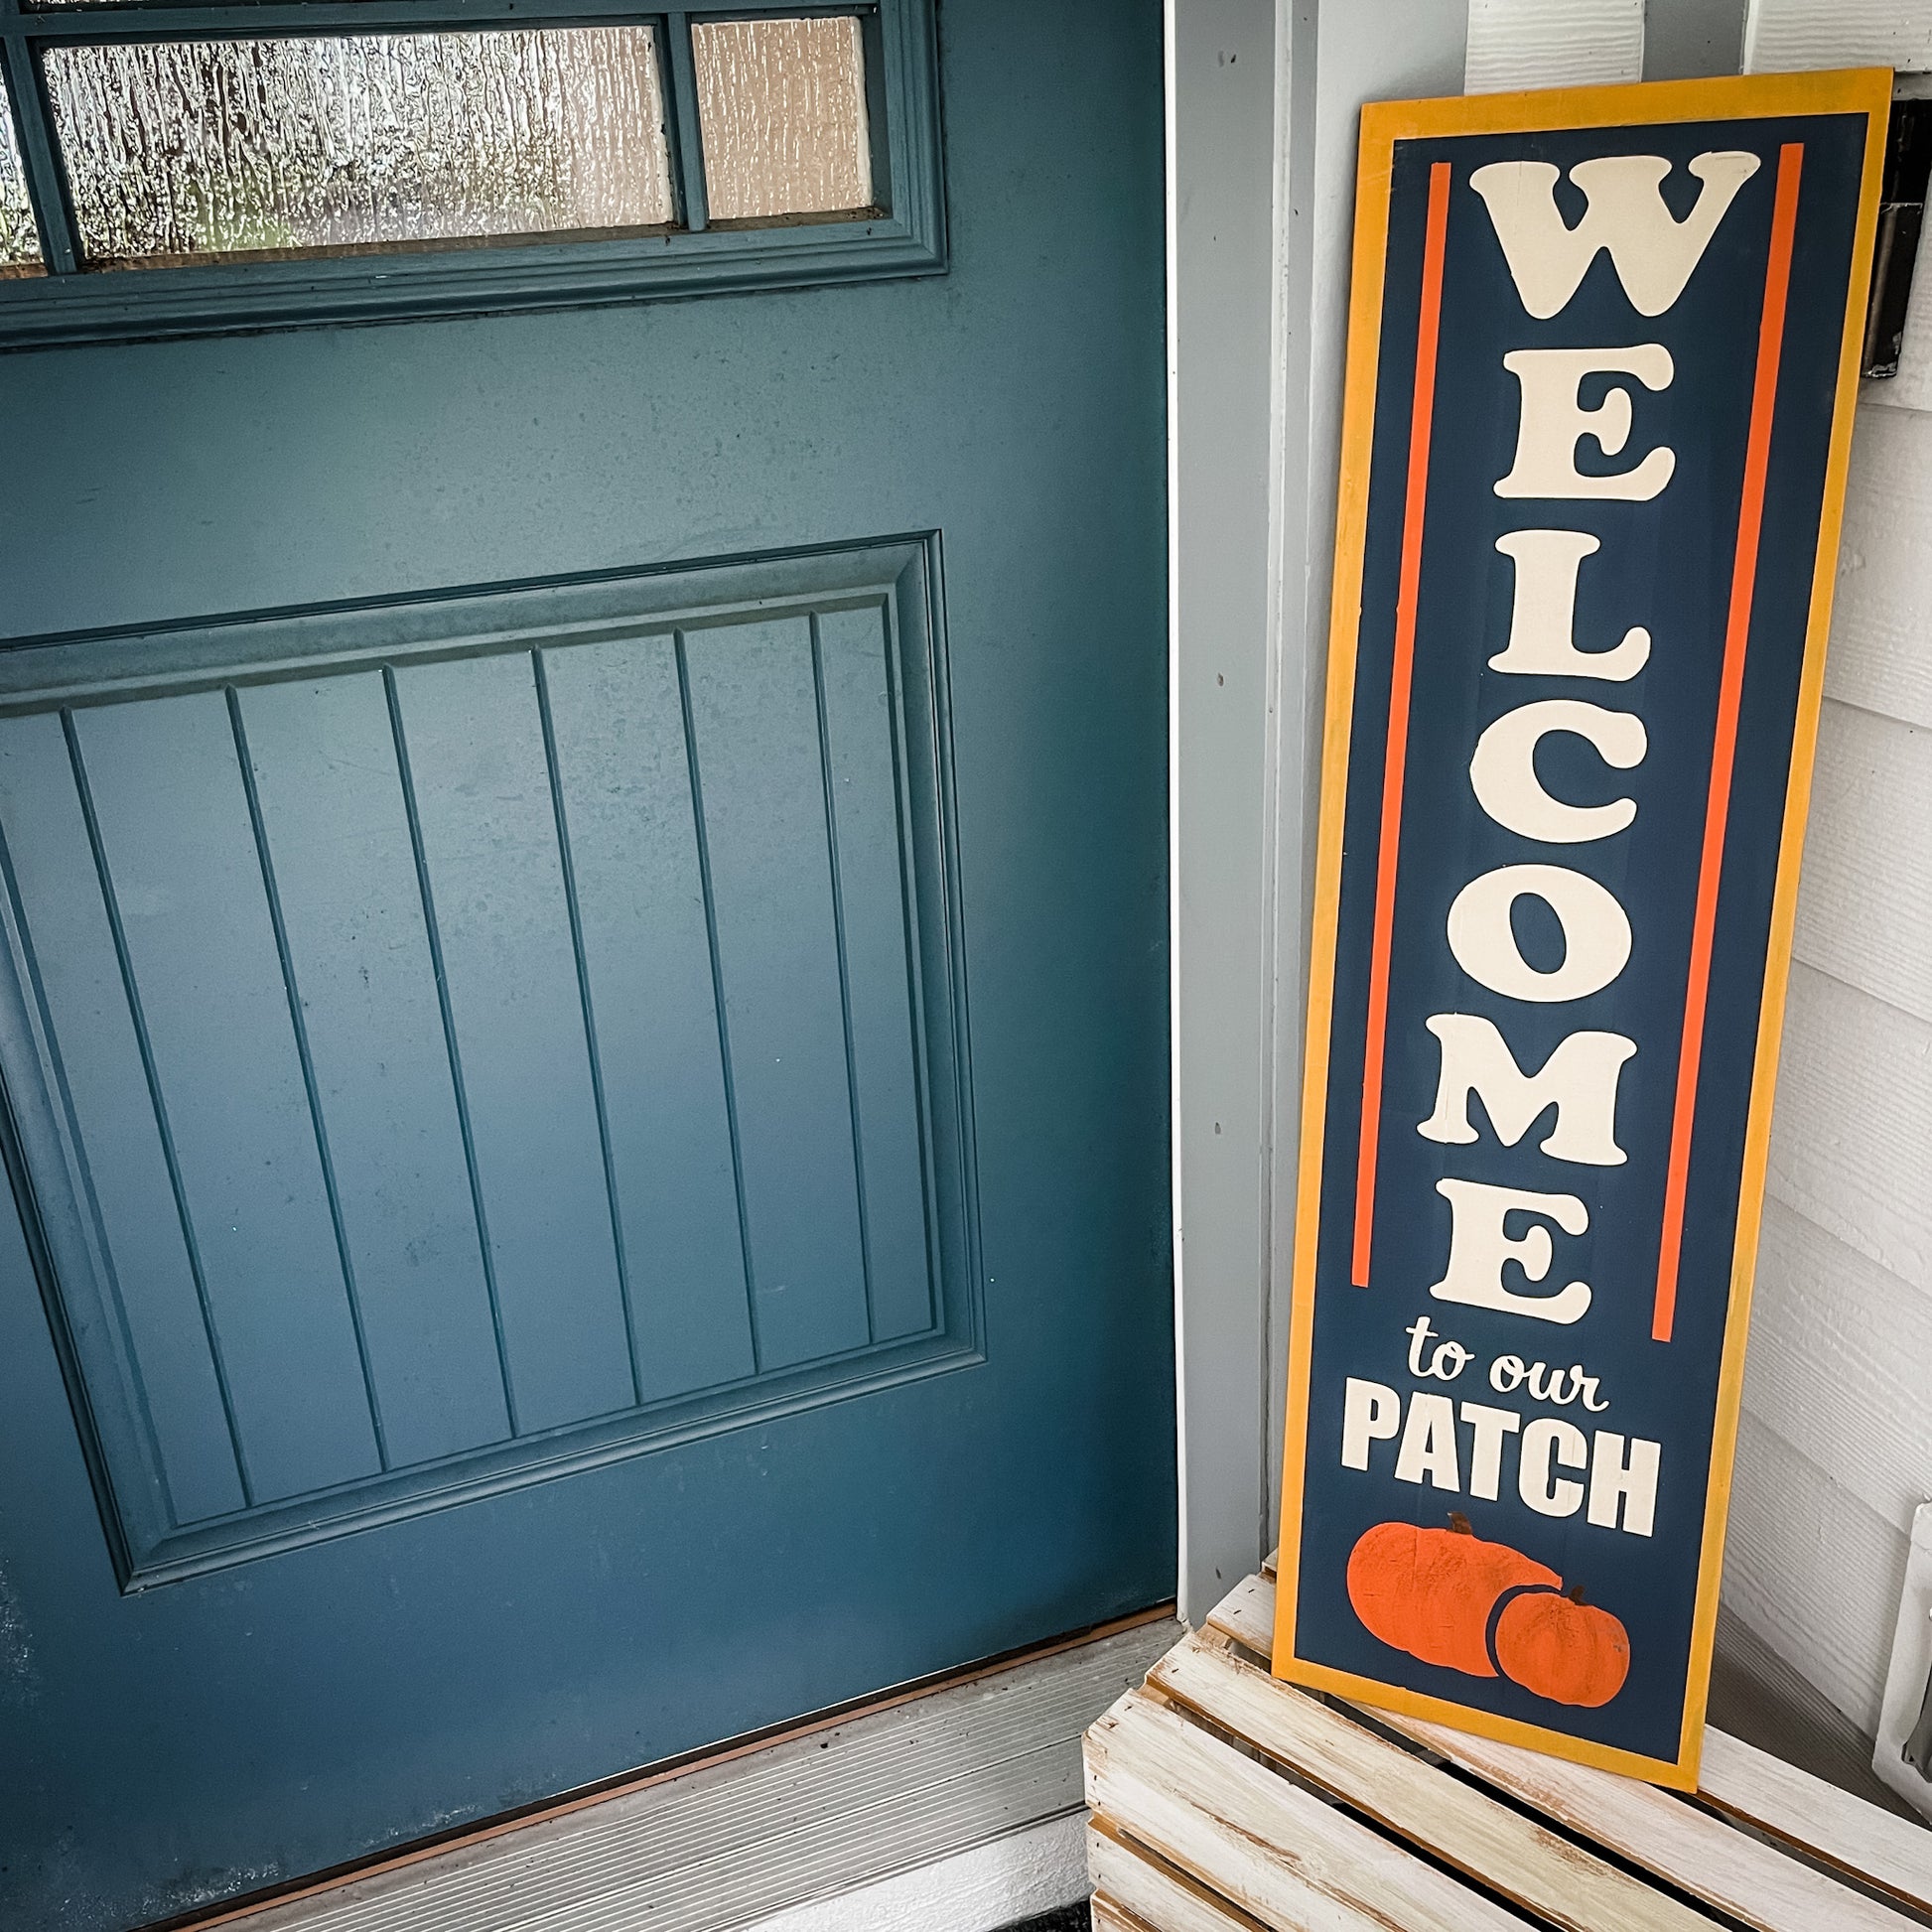 Welcome to our Patch (vertical): Plank Design - Paisley Grace Makery